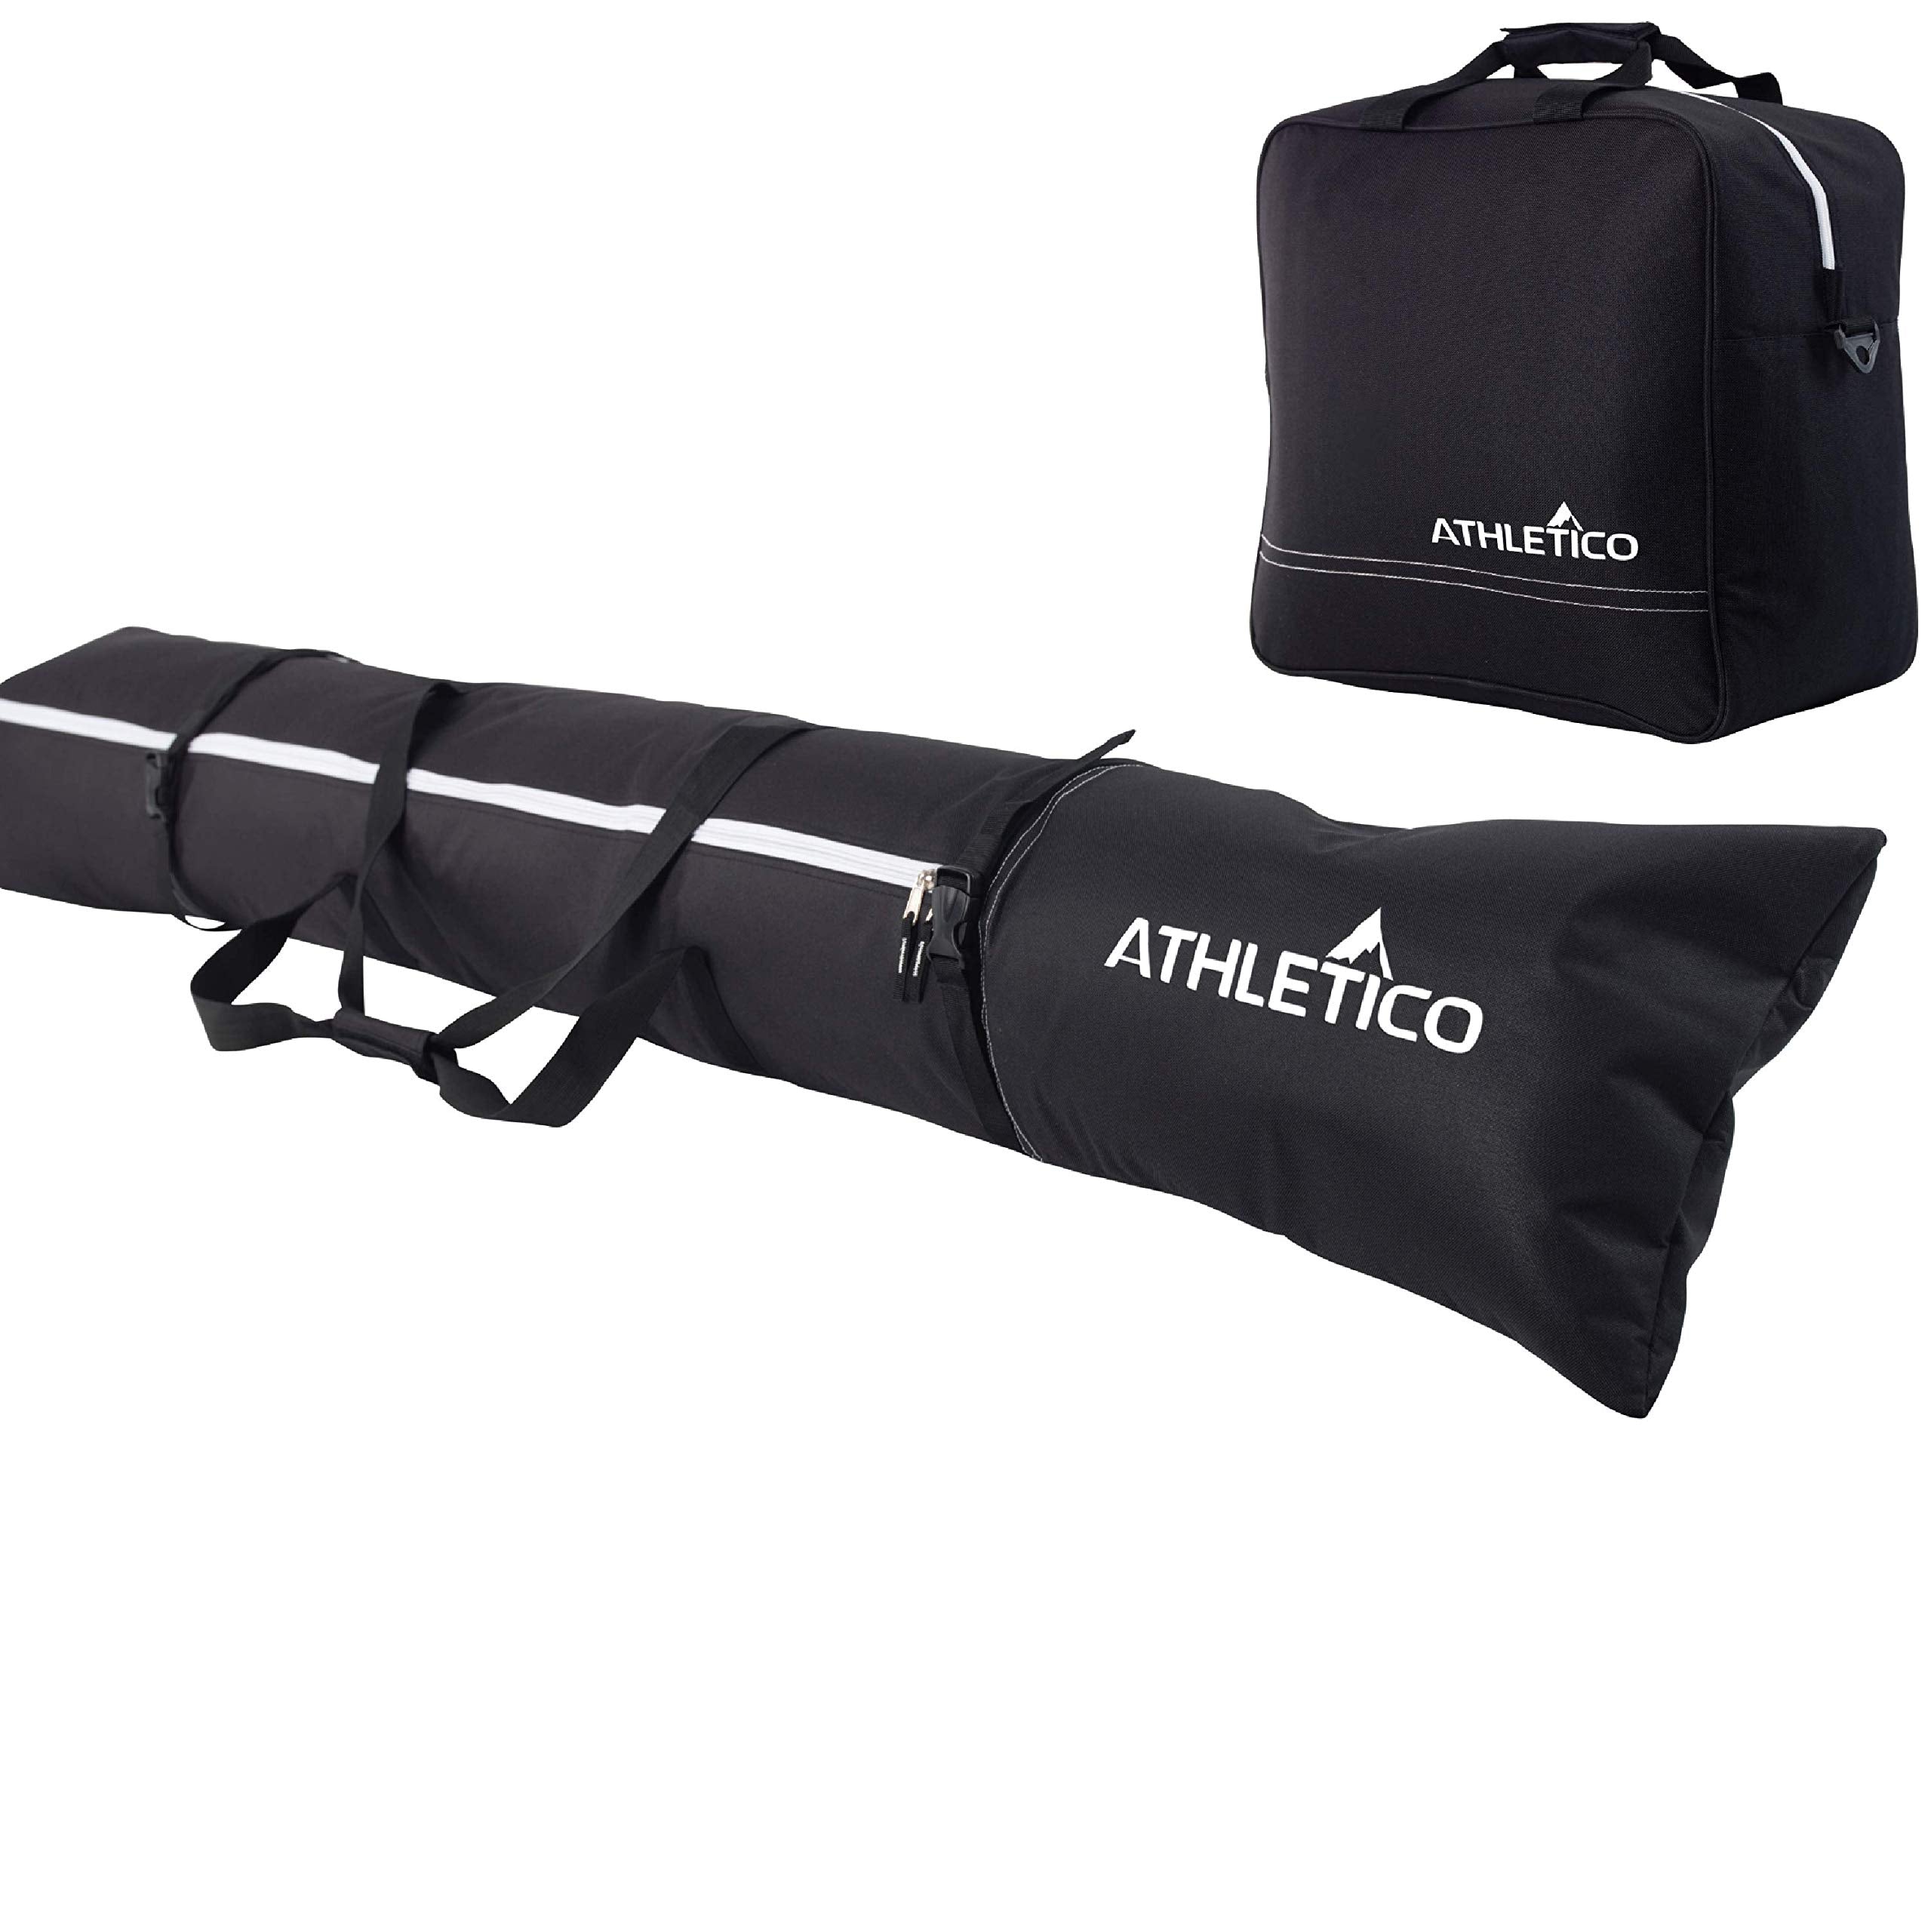 Athletico Padded Two-Piece Ski and Boot Bag Combo | Store & Transport Skis Up to 200 CM and Boots Up To Size 13 | Includes 1 Padded Ski Bag & 1 Padded Ski Boot Bag  - Acceptable